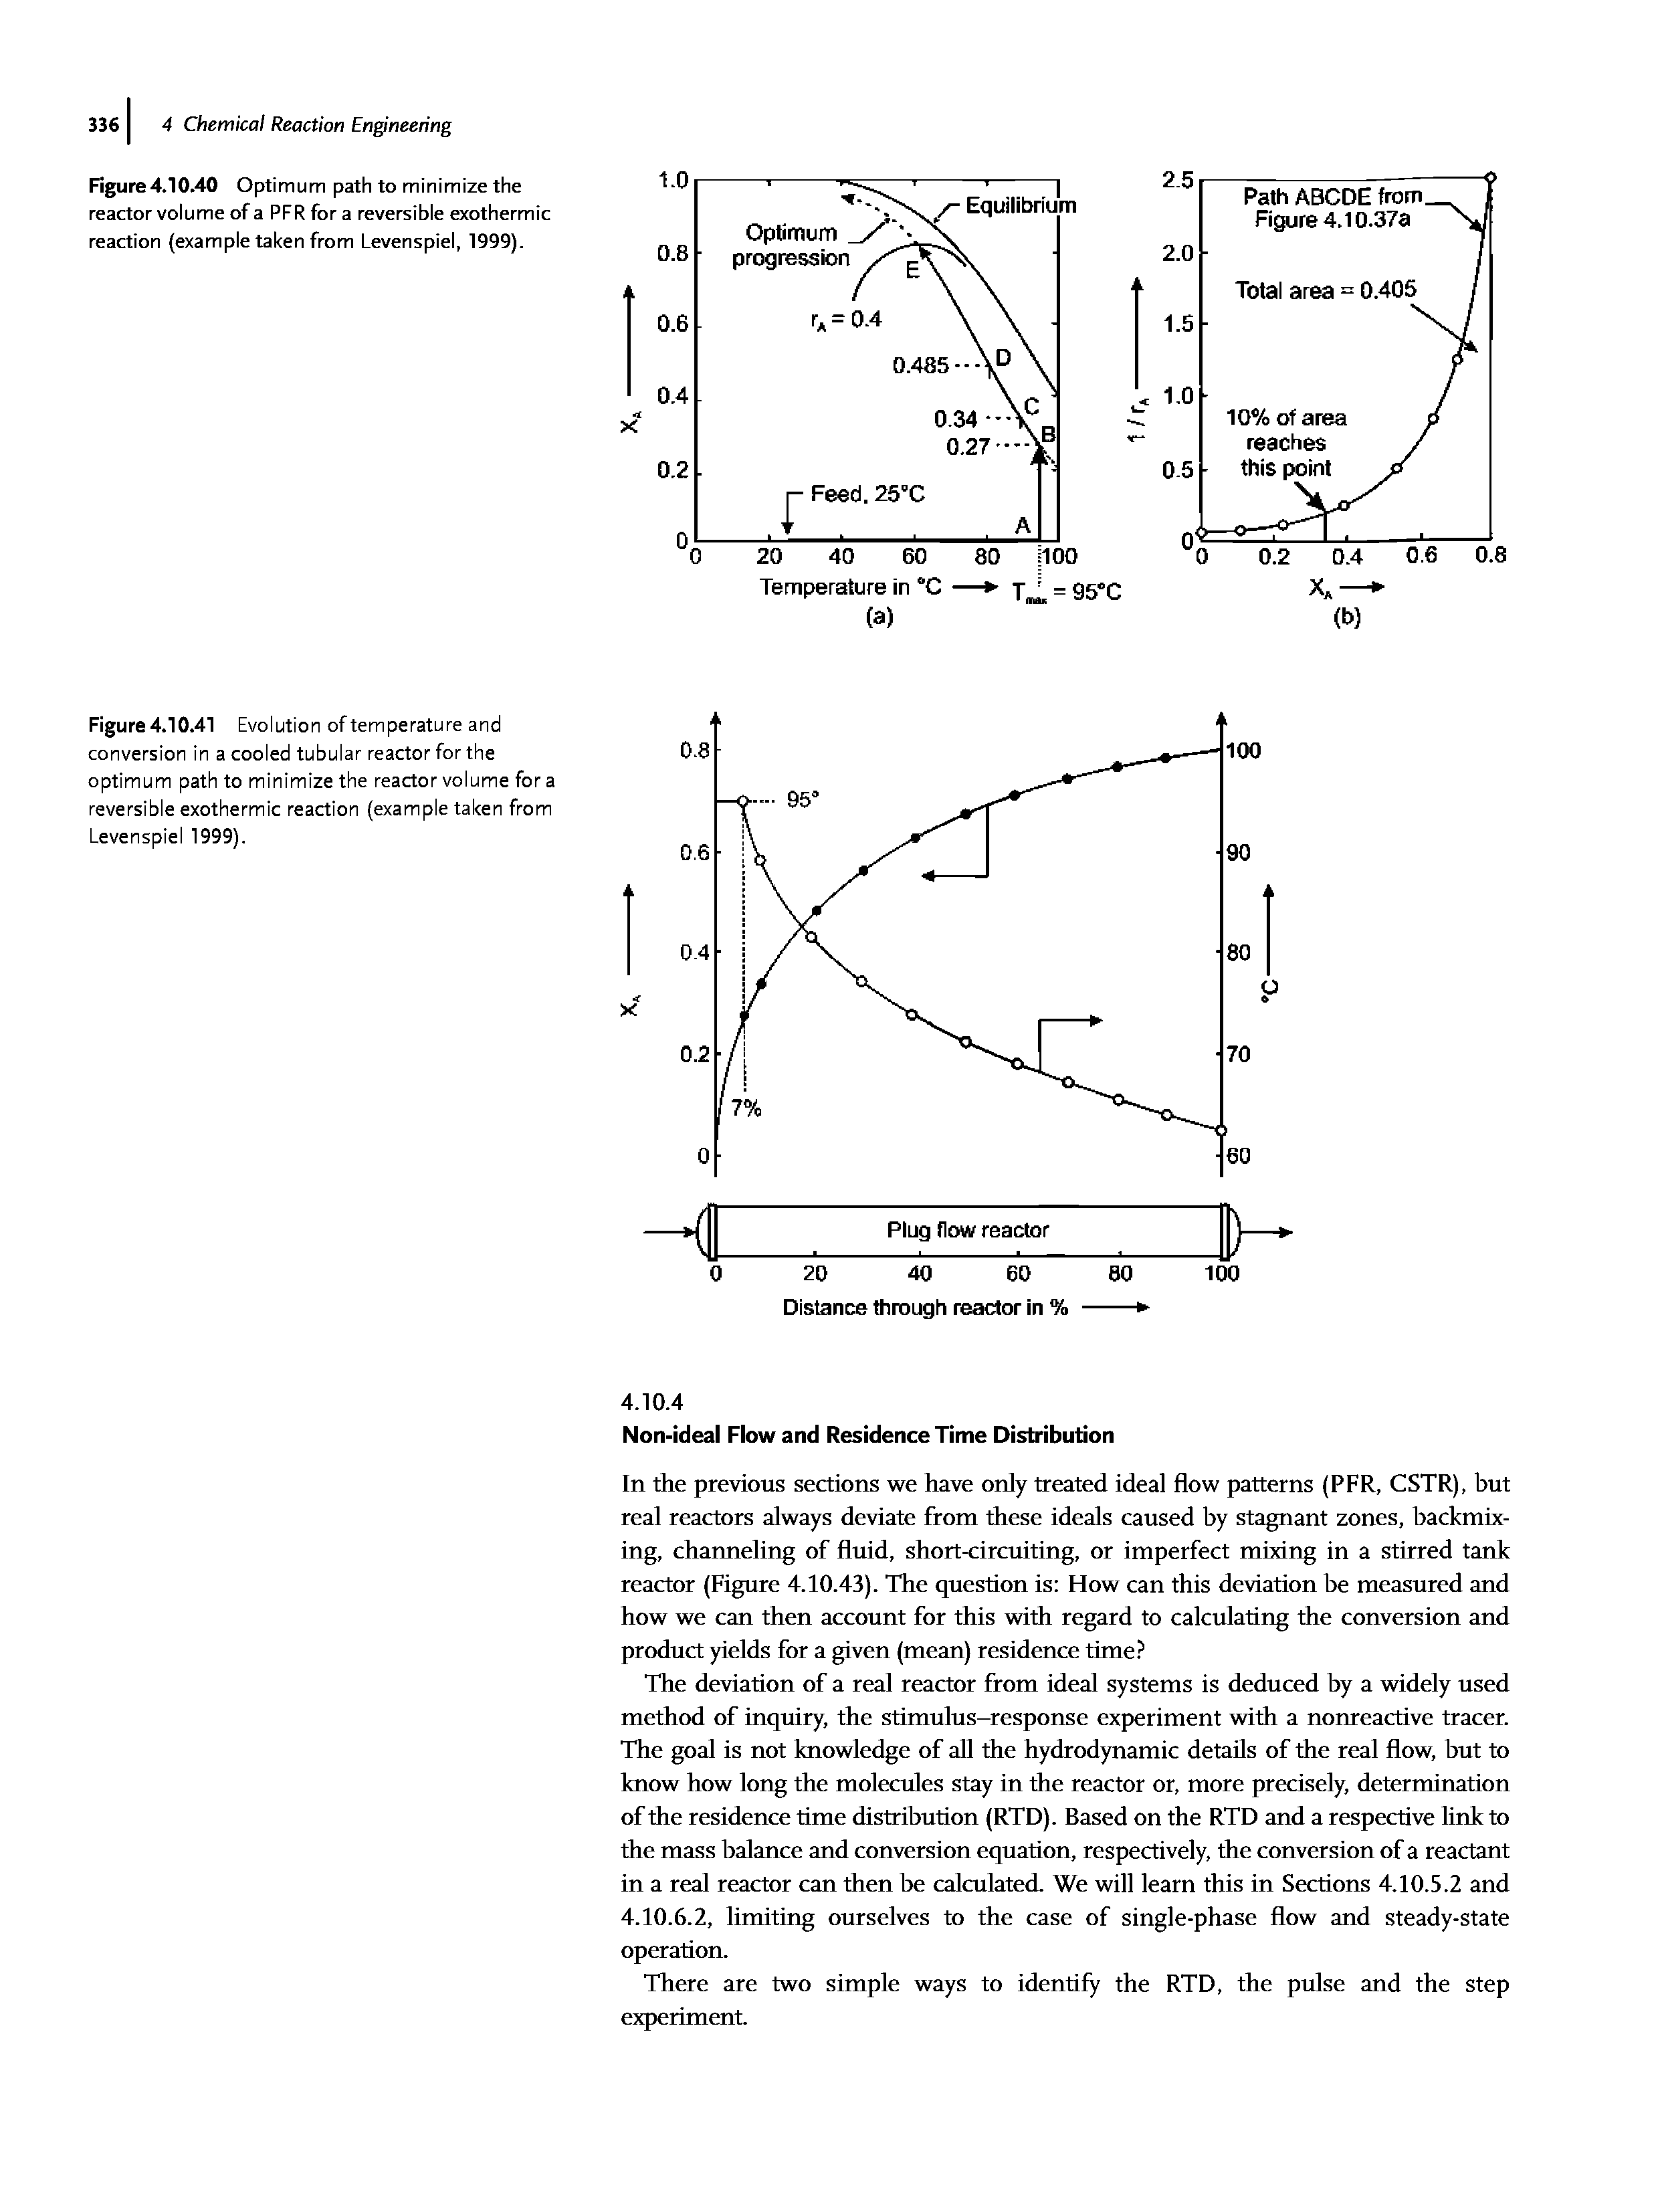 Figure 4.10.41 Evolution of temperature and conversion in a cooled tubular reactor for the optimum path to minimize the reactor volume for a reversible exothermic reaction (example taken from Levenspiel 1999).